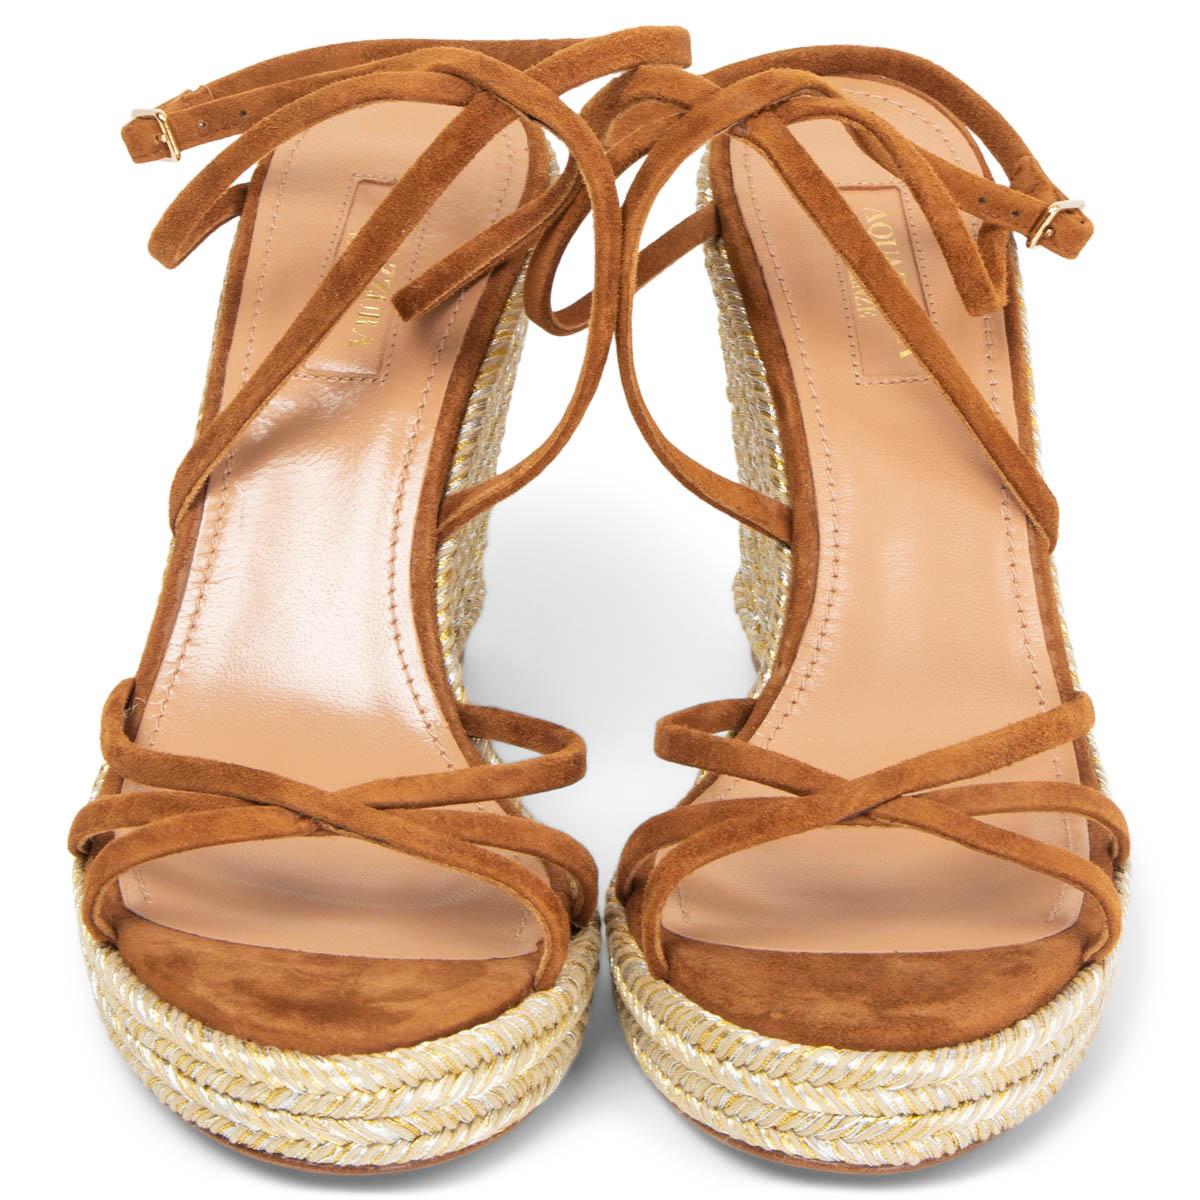 100% authentic Aquazzura Gin Espadrille Wedge Sandals in camel suede leather. Close with a buckle around the ankle. Brand new. 

Measurements
Imprinted Size	37
Shoe Size	37
Inside Sole	23.5cm (9.2in)
Width	7cm (2.7in)
Heel	10cm